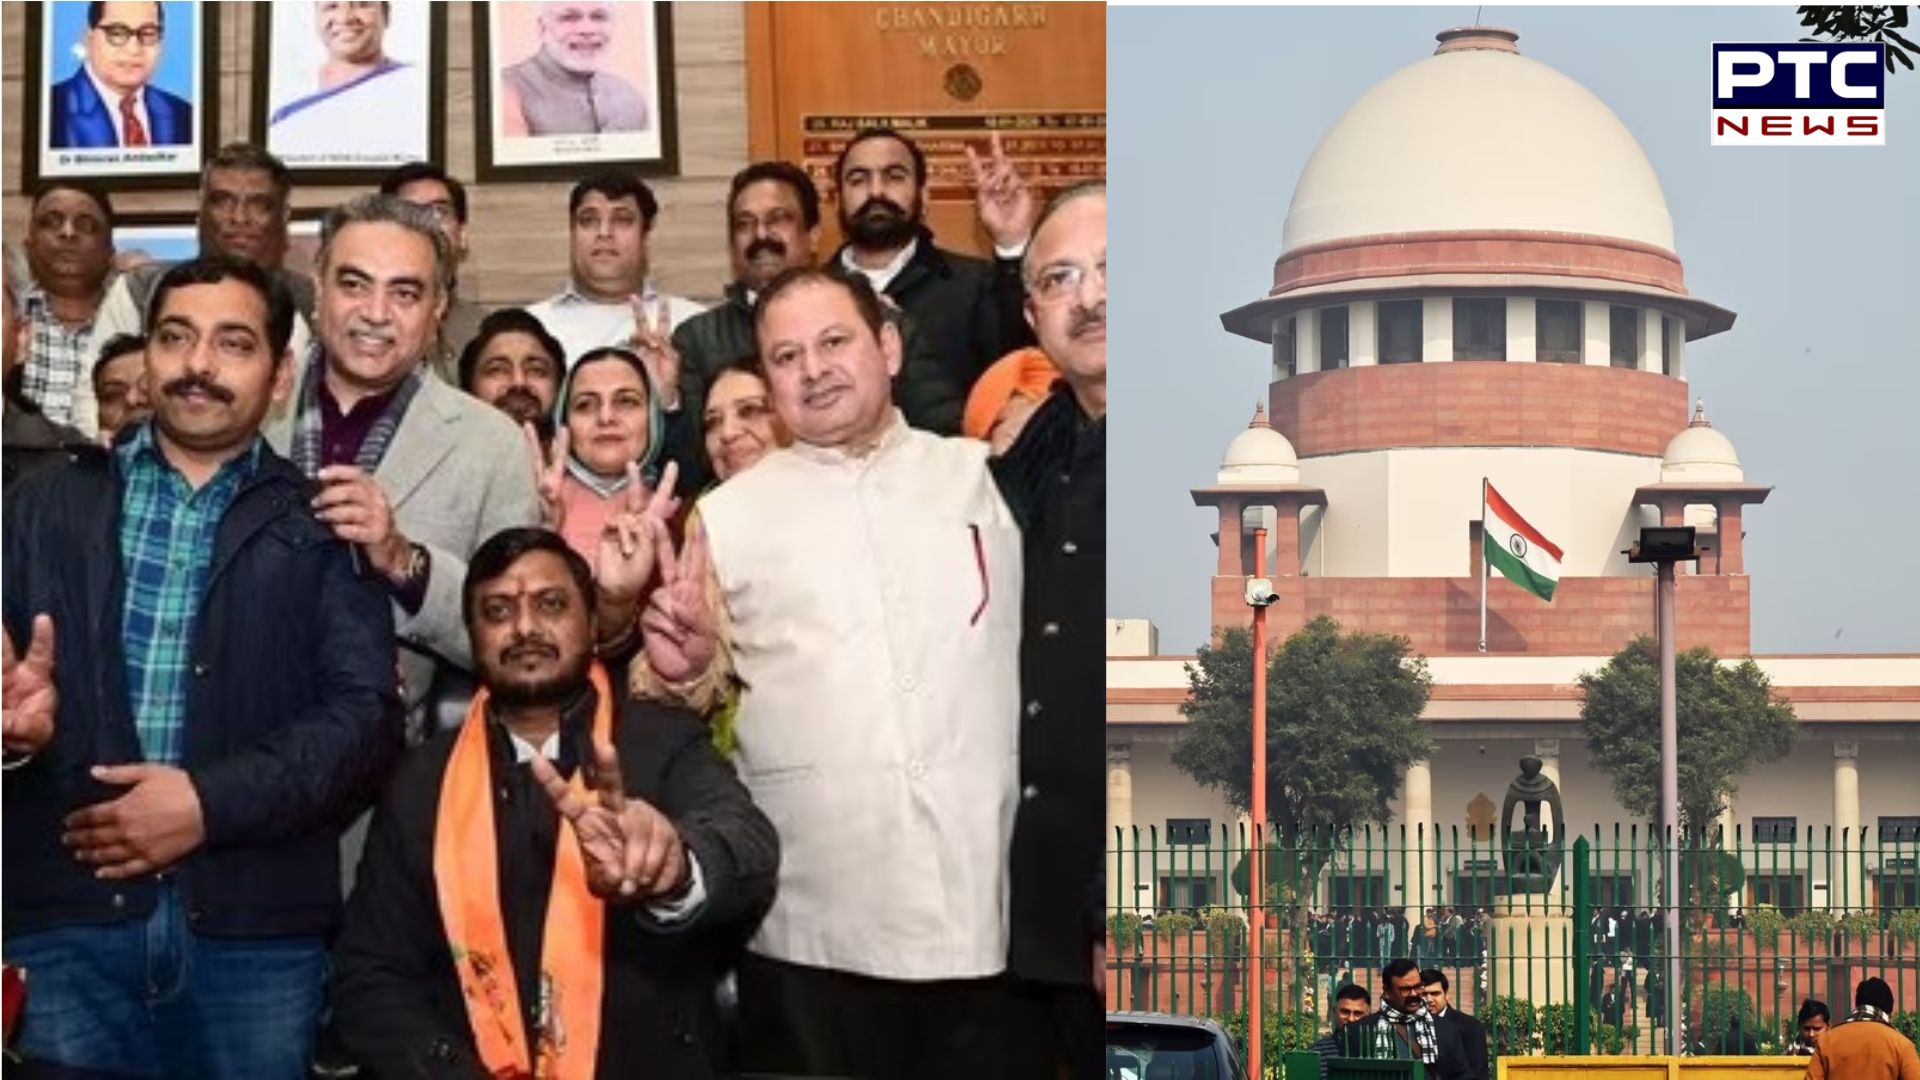 Chandigarh mayoral elections: 'This is mockery, murder of democracy': SC takes on presiding officer